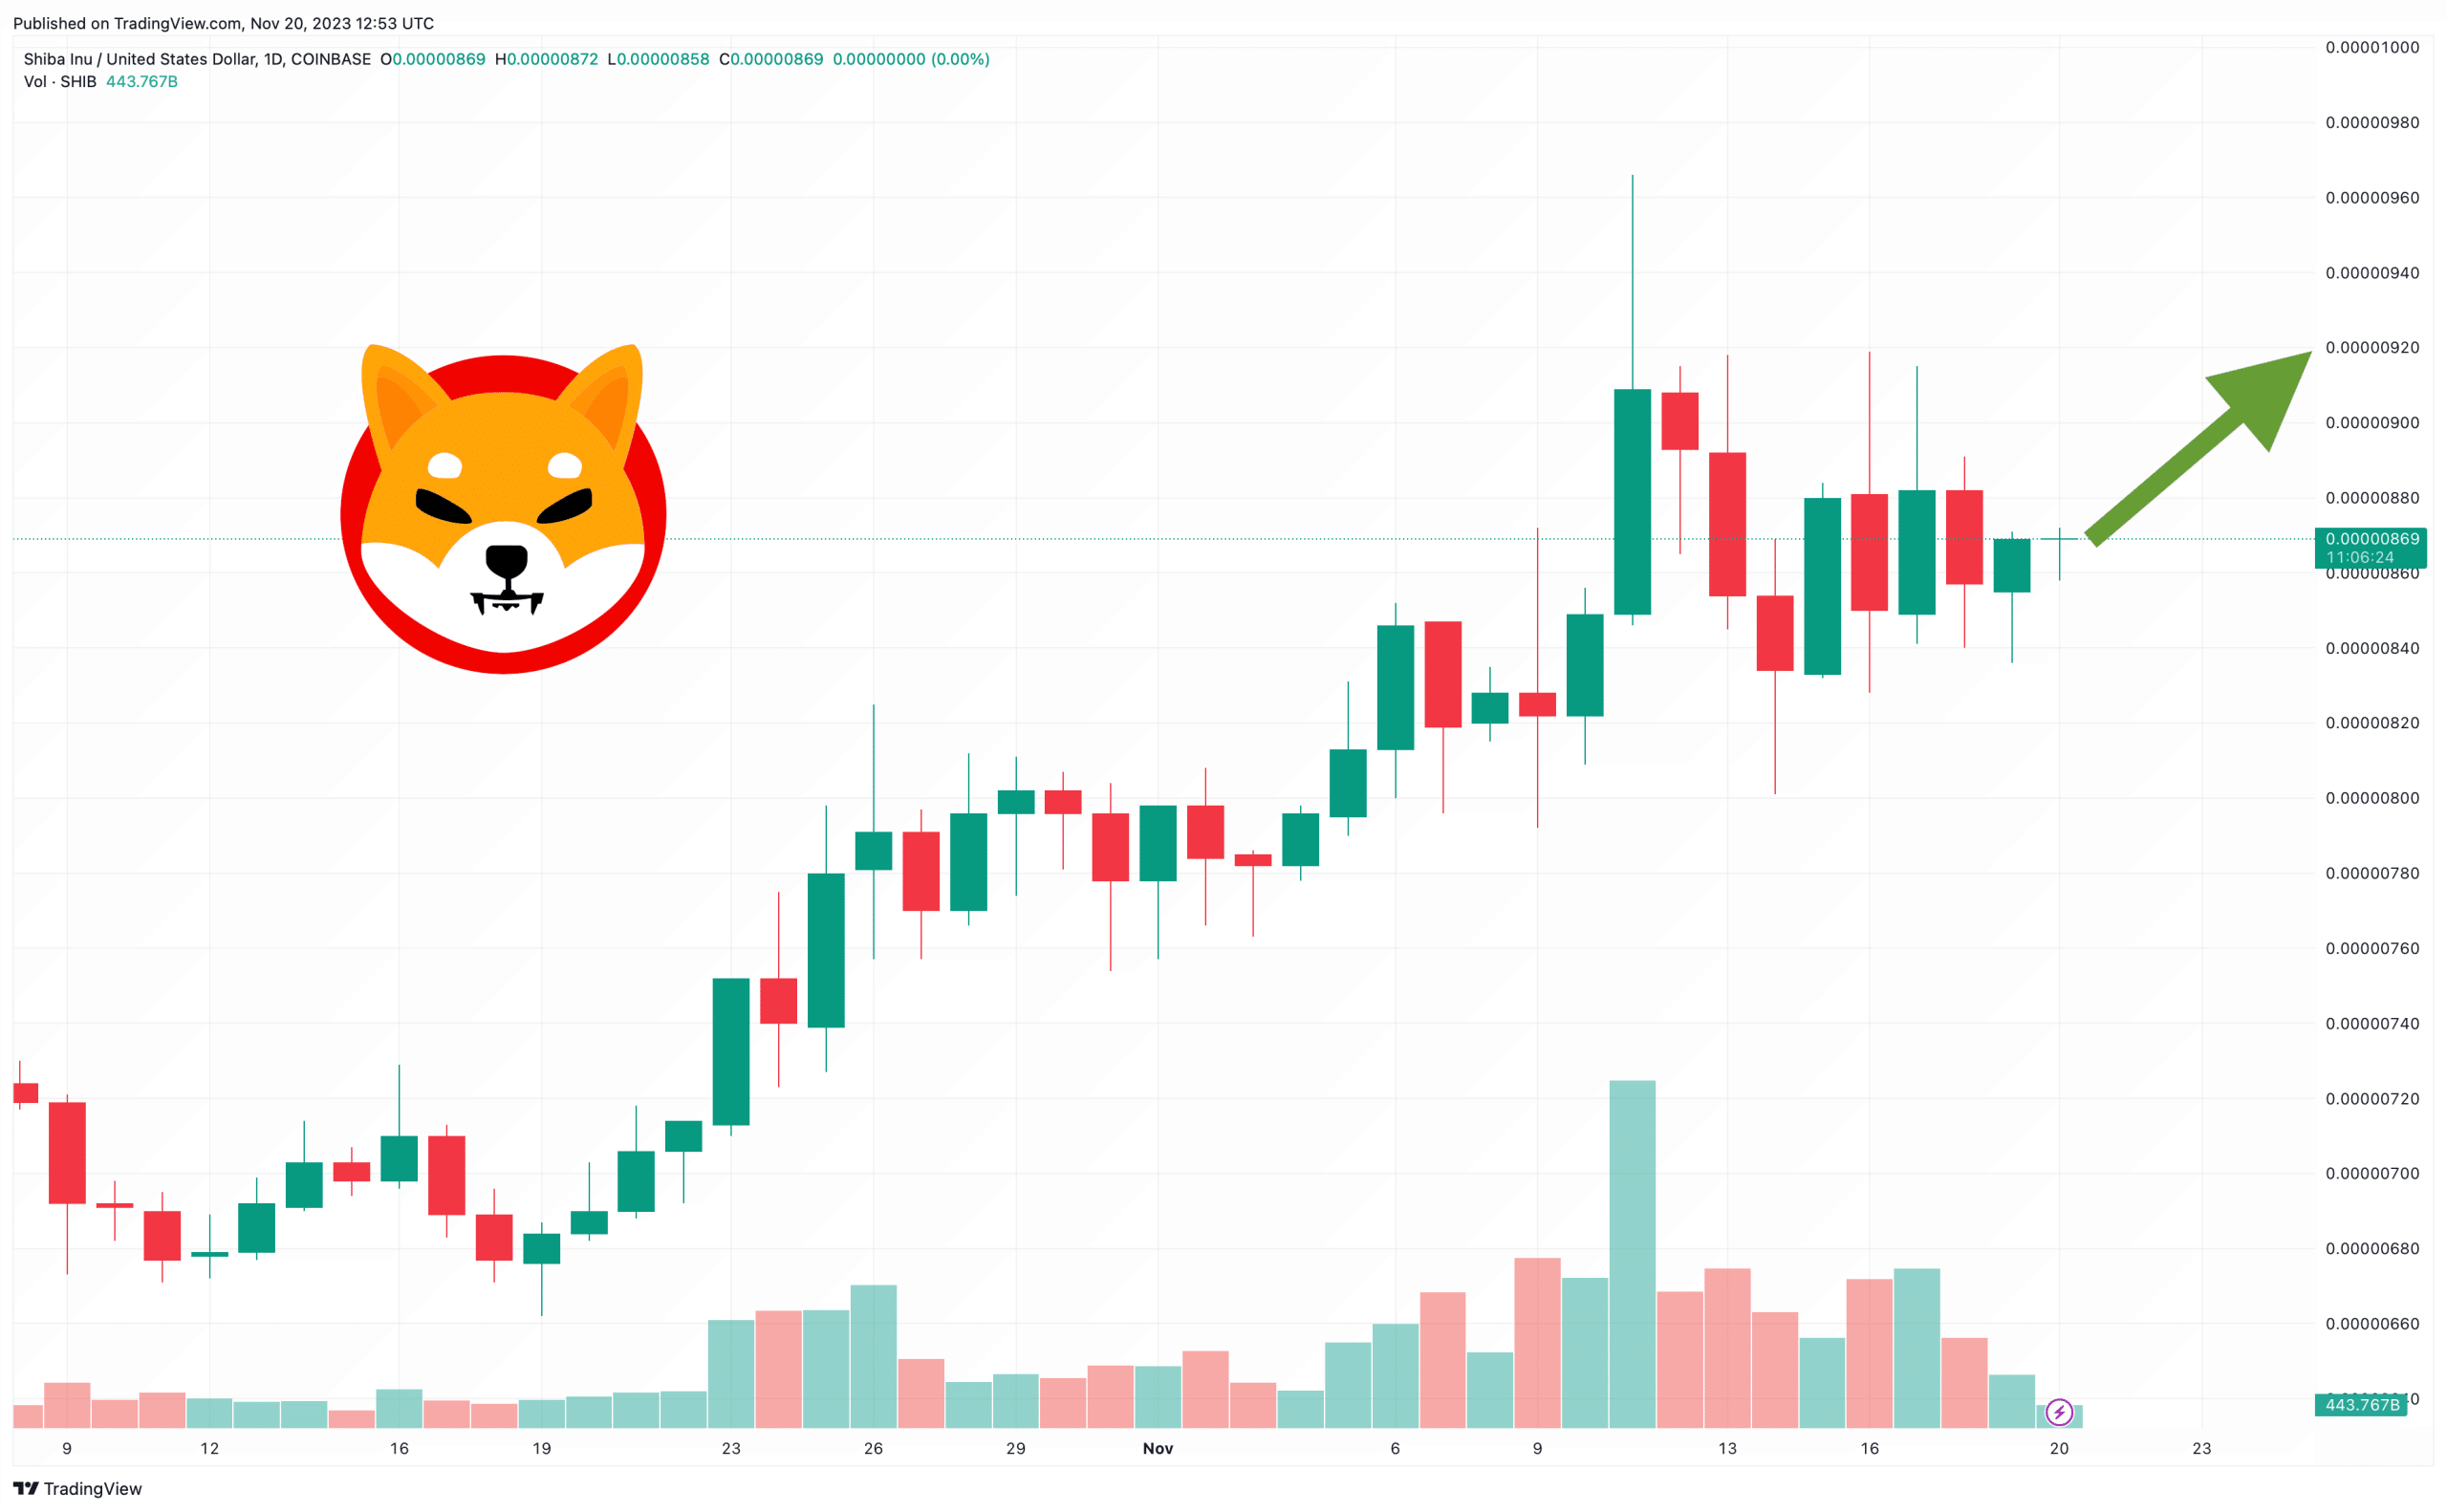 Shiba Inu Price Prediction As It Hits $100 Million Trading Volume – Is Meme Coin Starting A New Bull Trend?